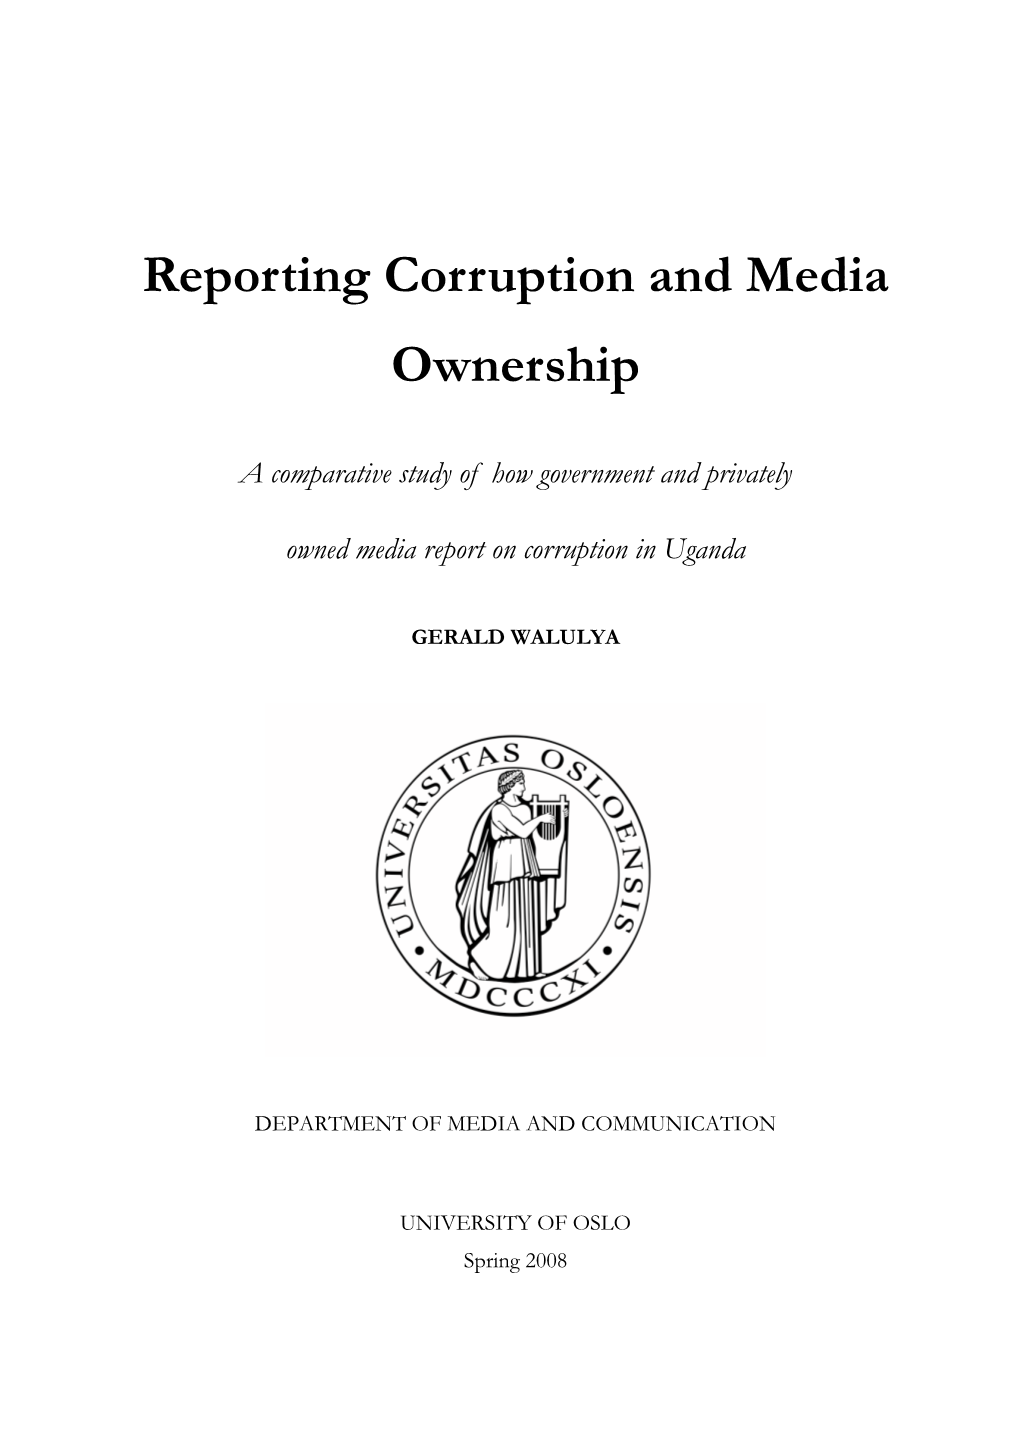 Reporting Corruption and Media Ownership